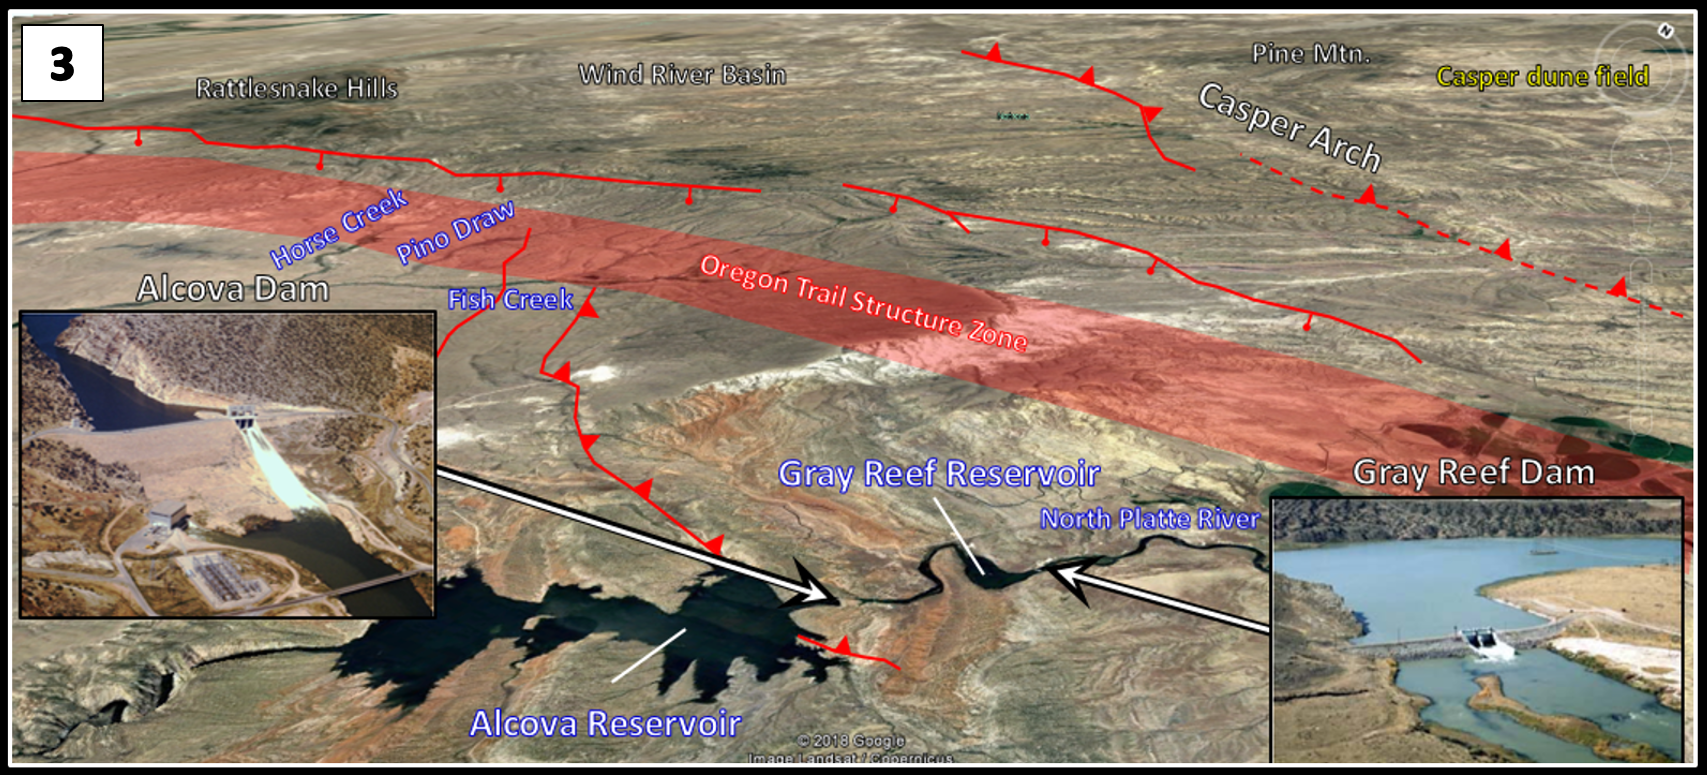  Aerial picture of Alcova Reservoir annotated with faults, and pictures of Alcova Dam and Gray Reef Dam, Wyoming